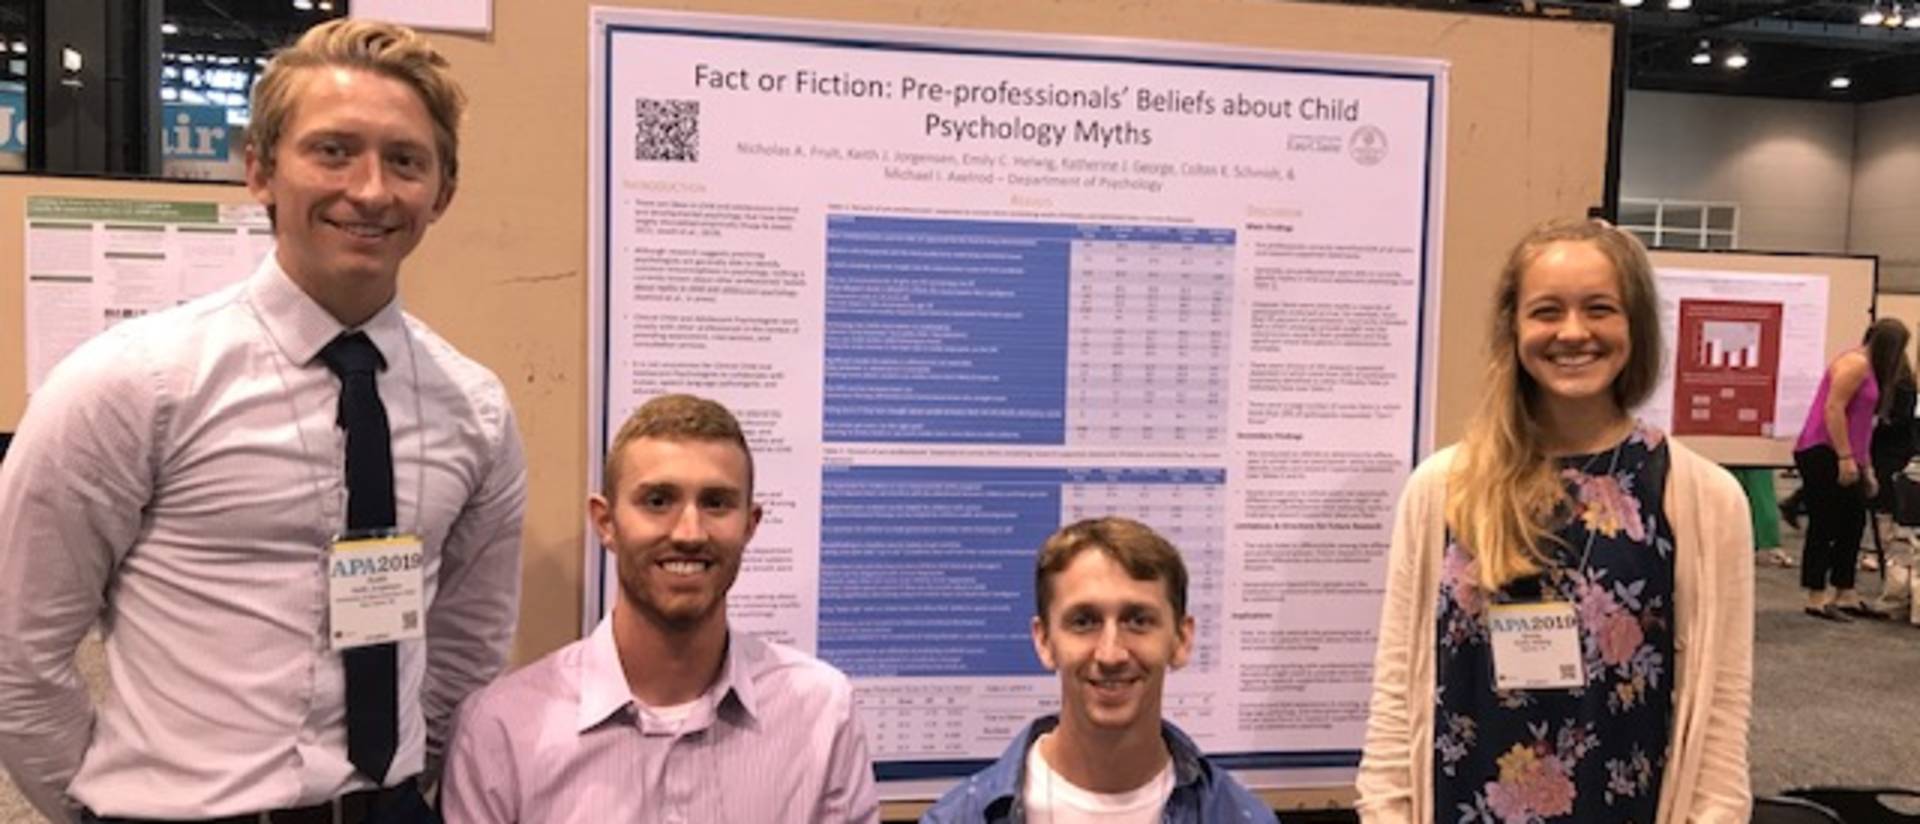 APA 2019 Poster Picture